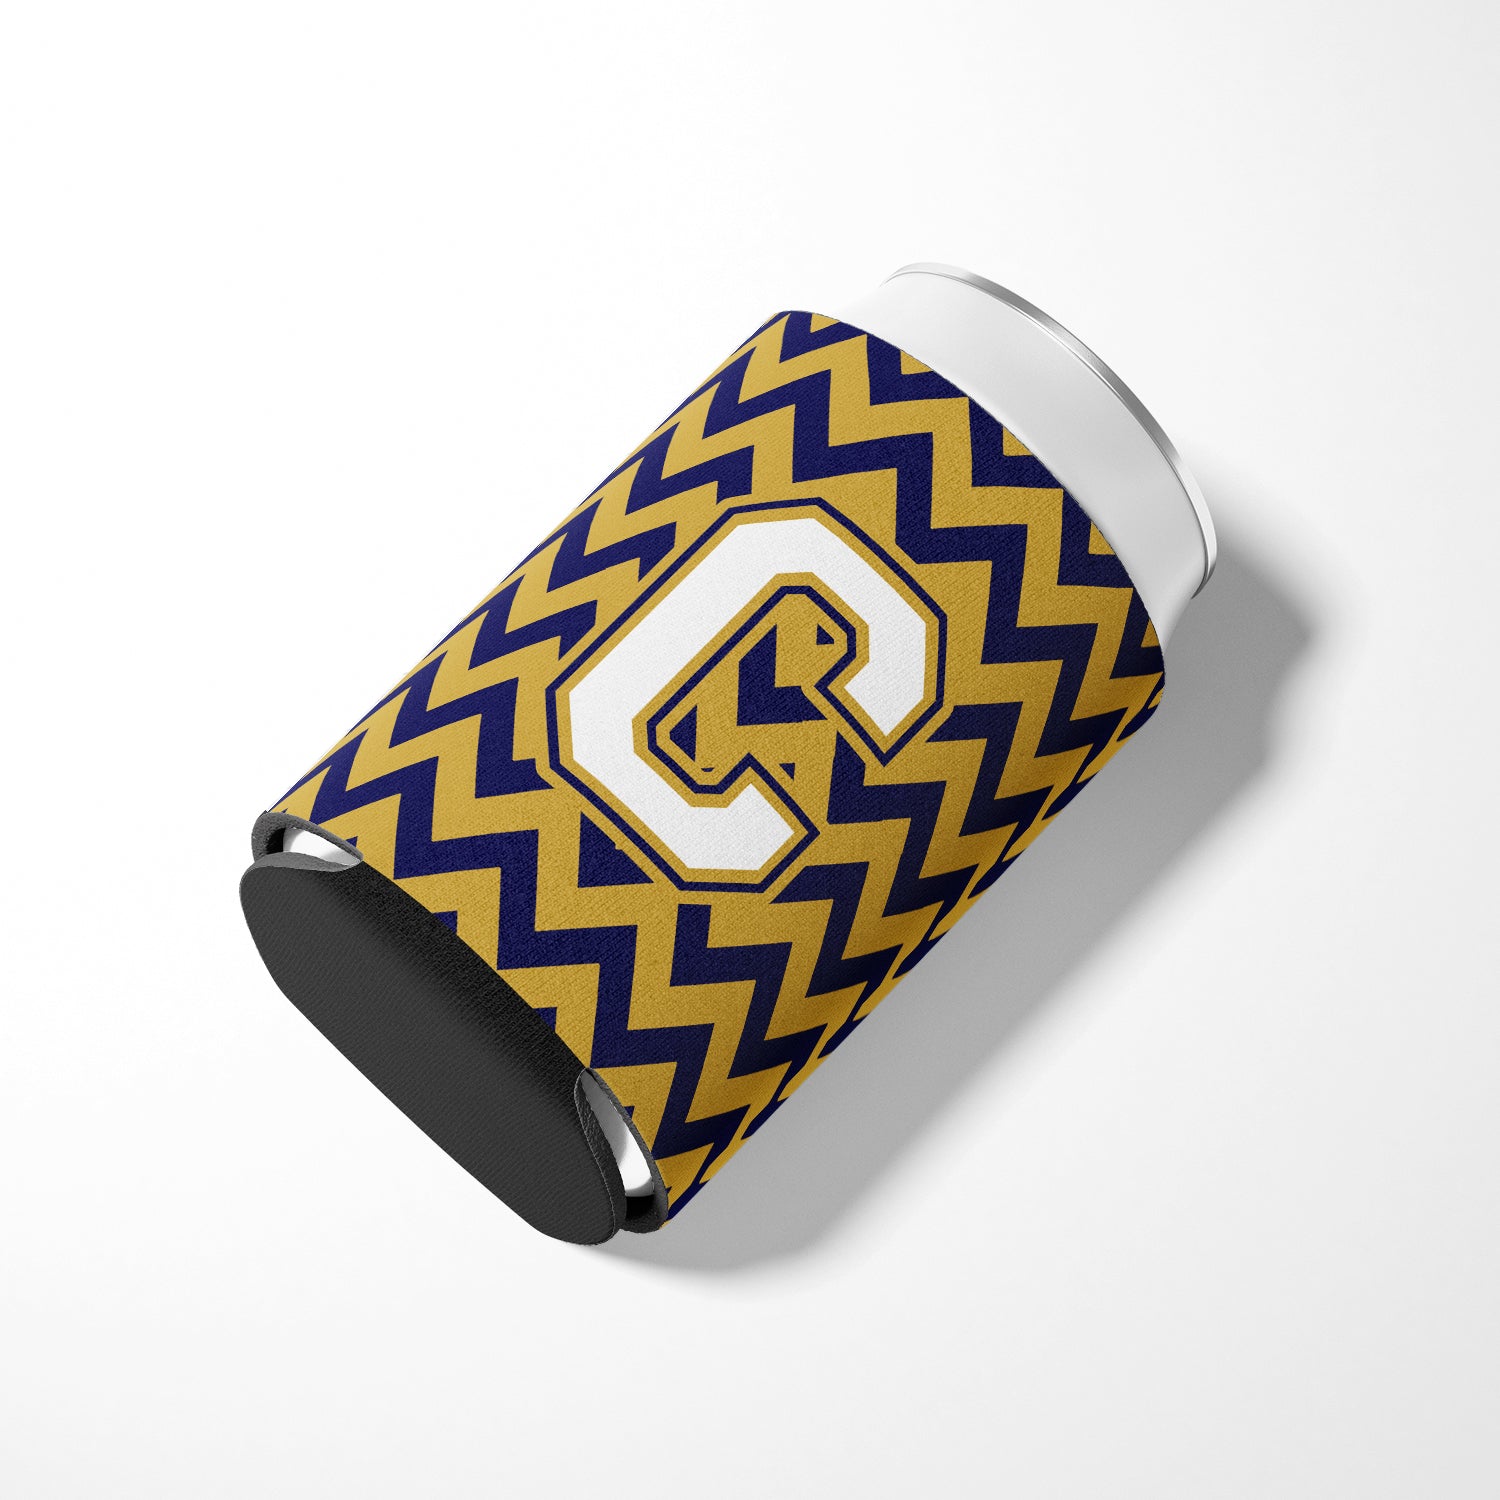 Letter C Chevron Navy Blue and Gold Can or Bottle Hugger CJ1057-CCC.